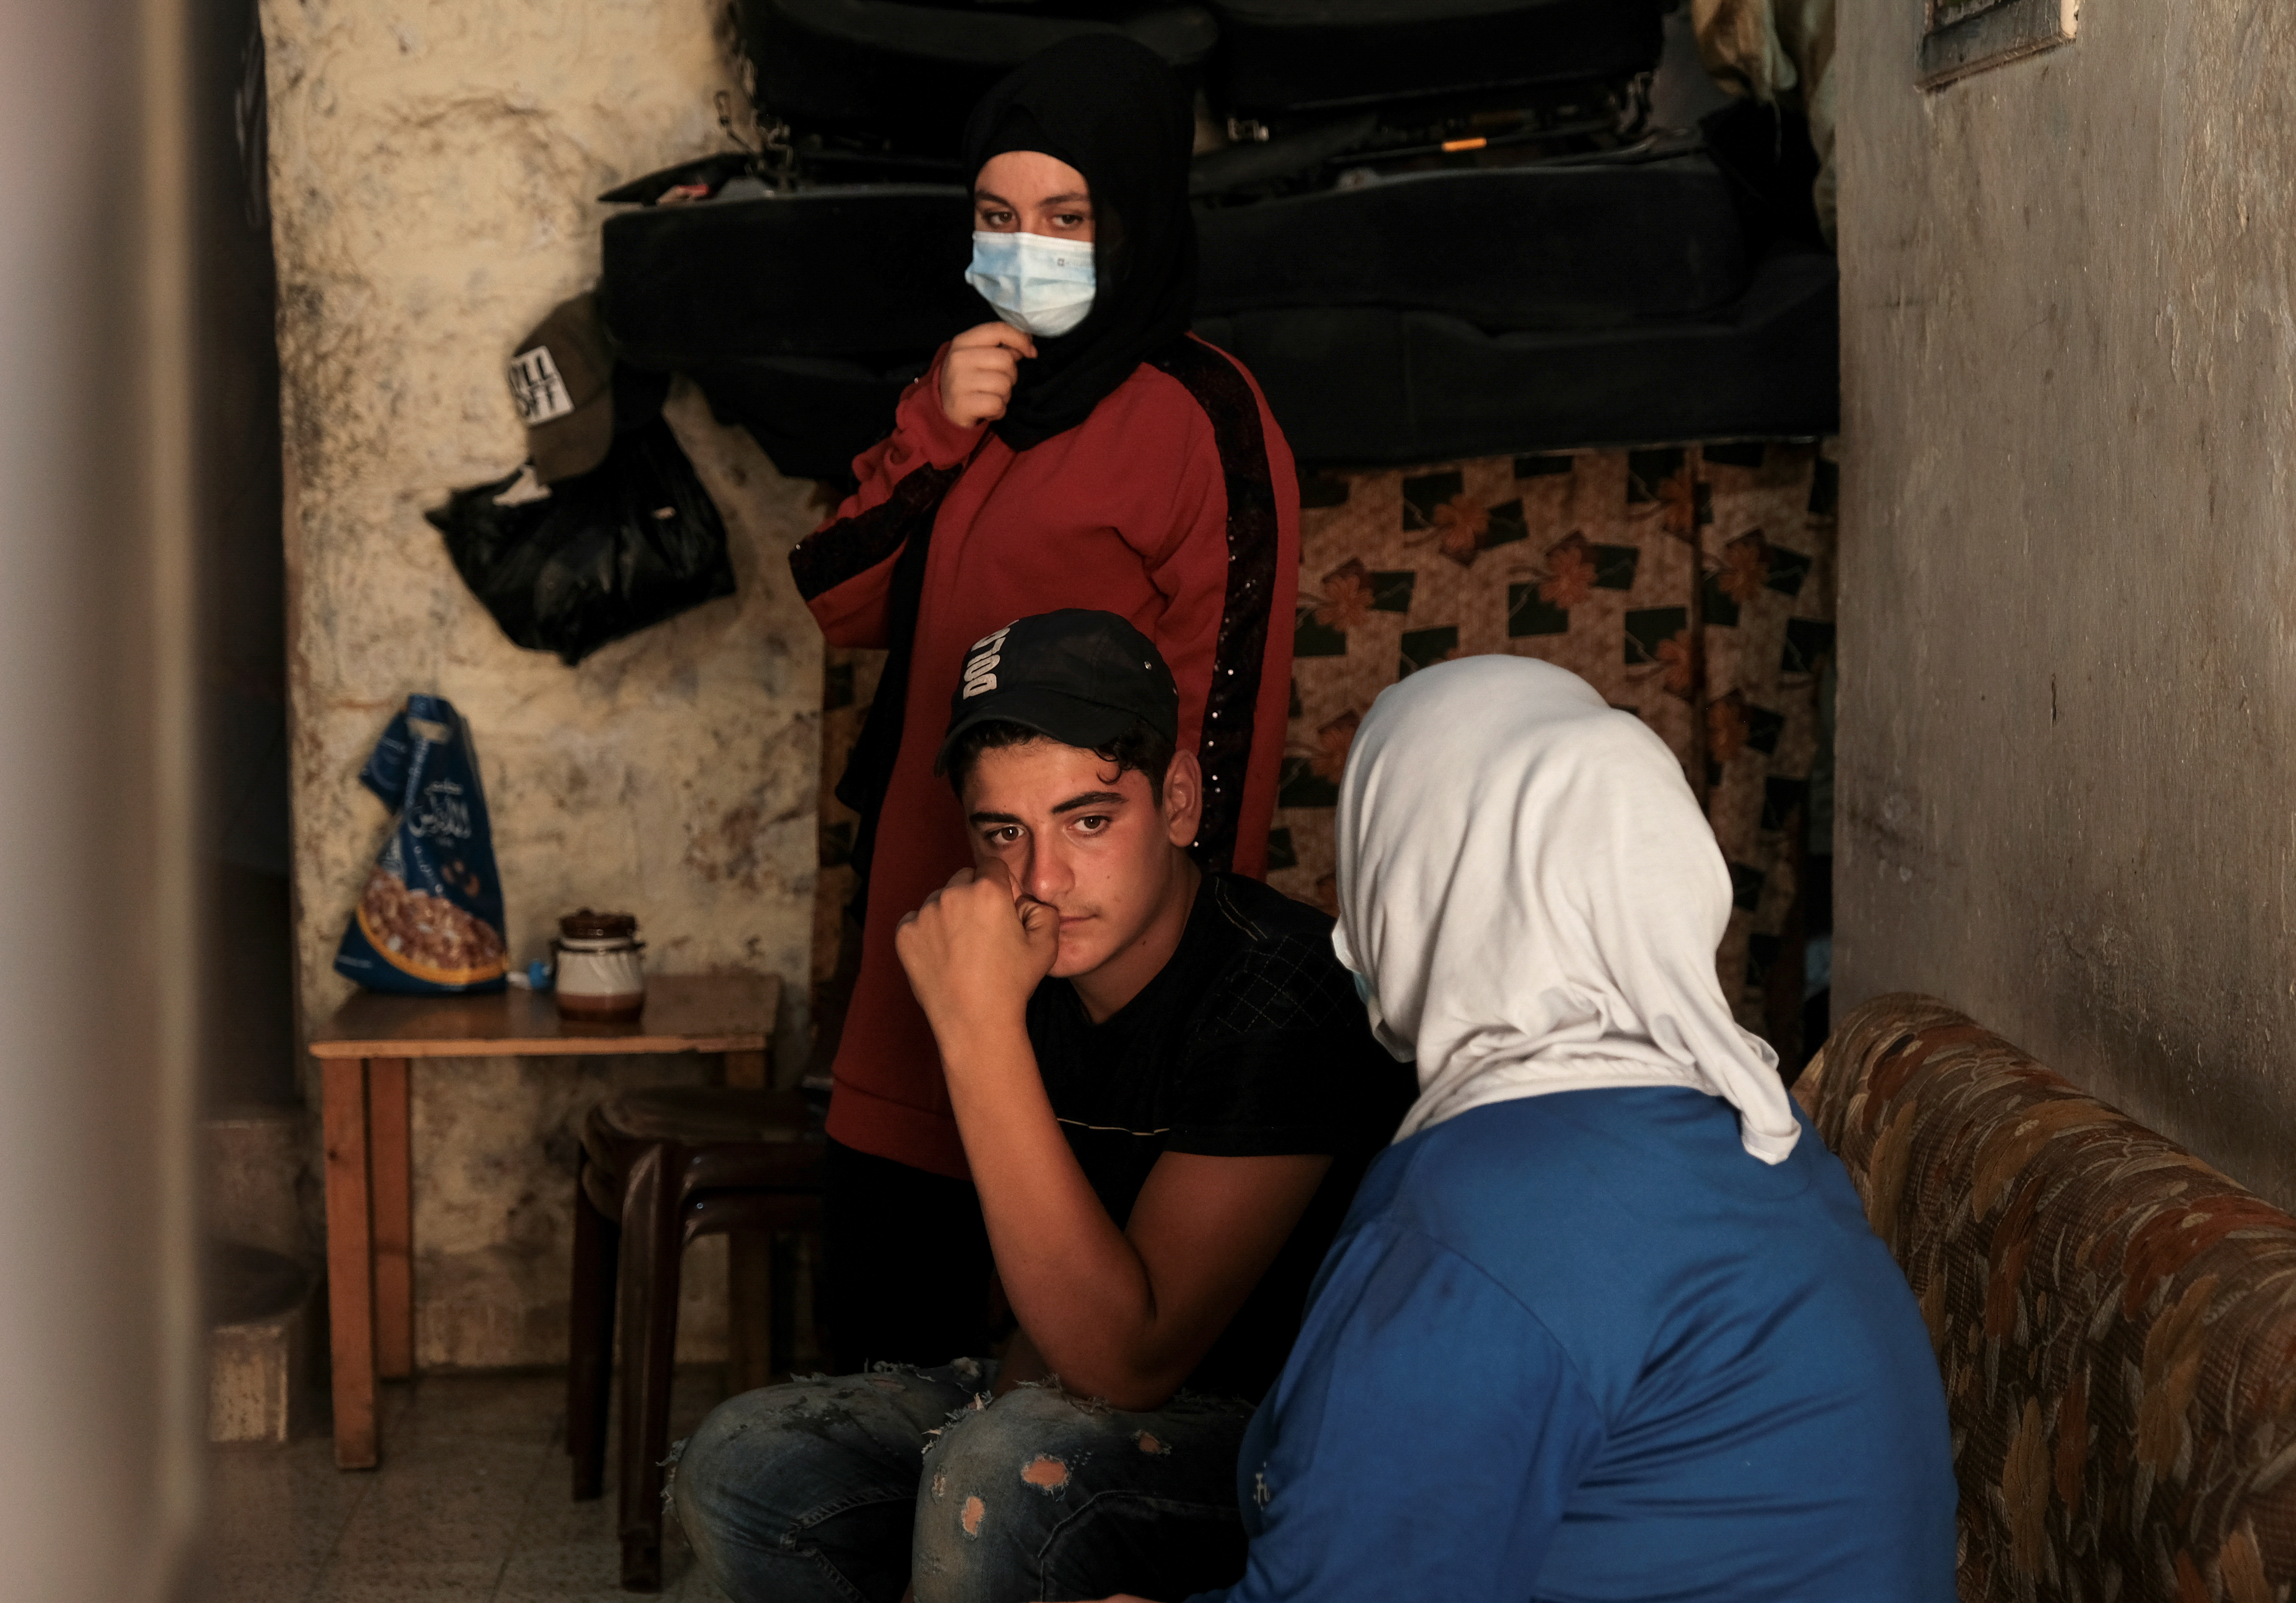 Shadi Lababidi, 16, sits with his mother and sister at their home in Tripoli